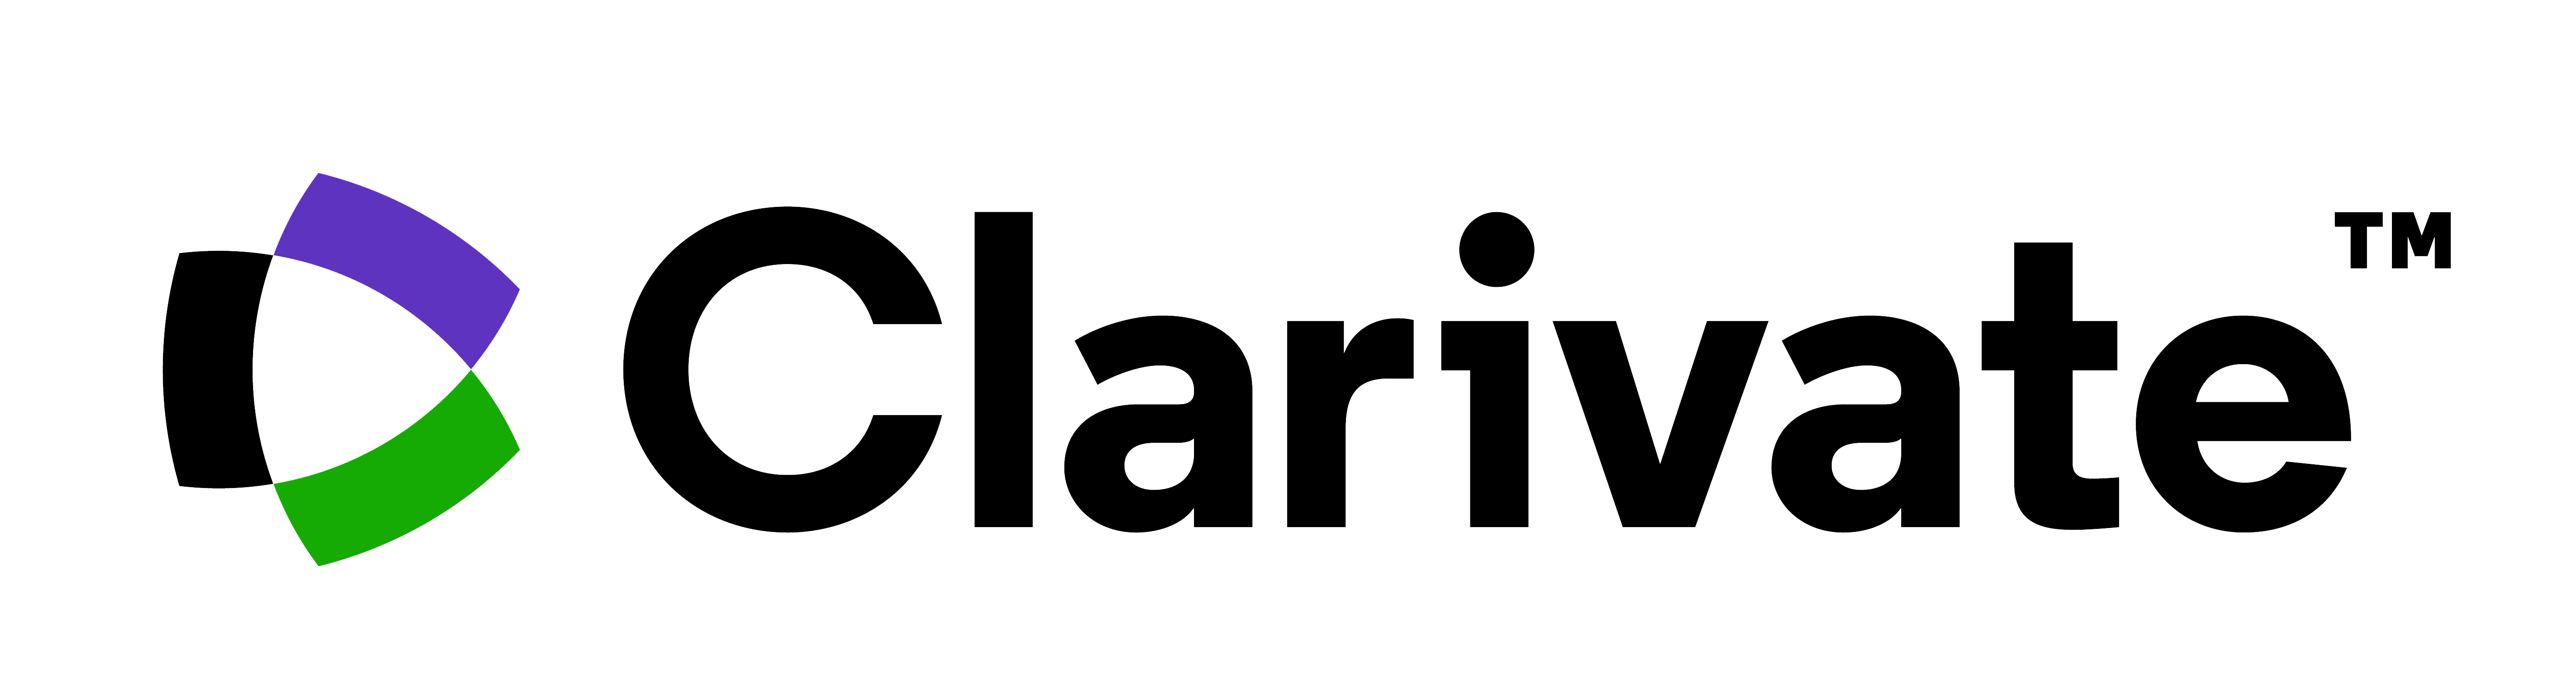 [LOGO FOR Clarivate]